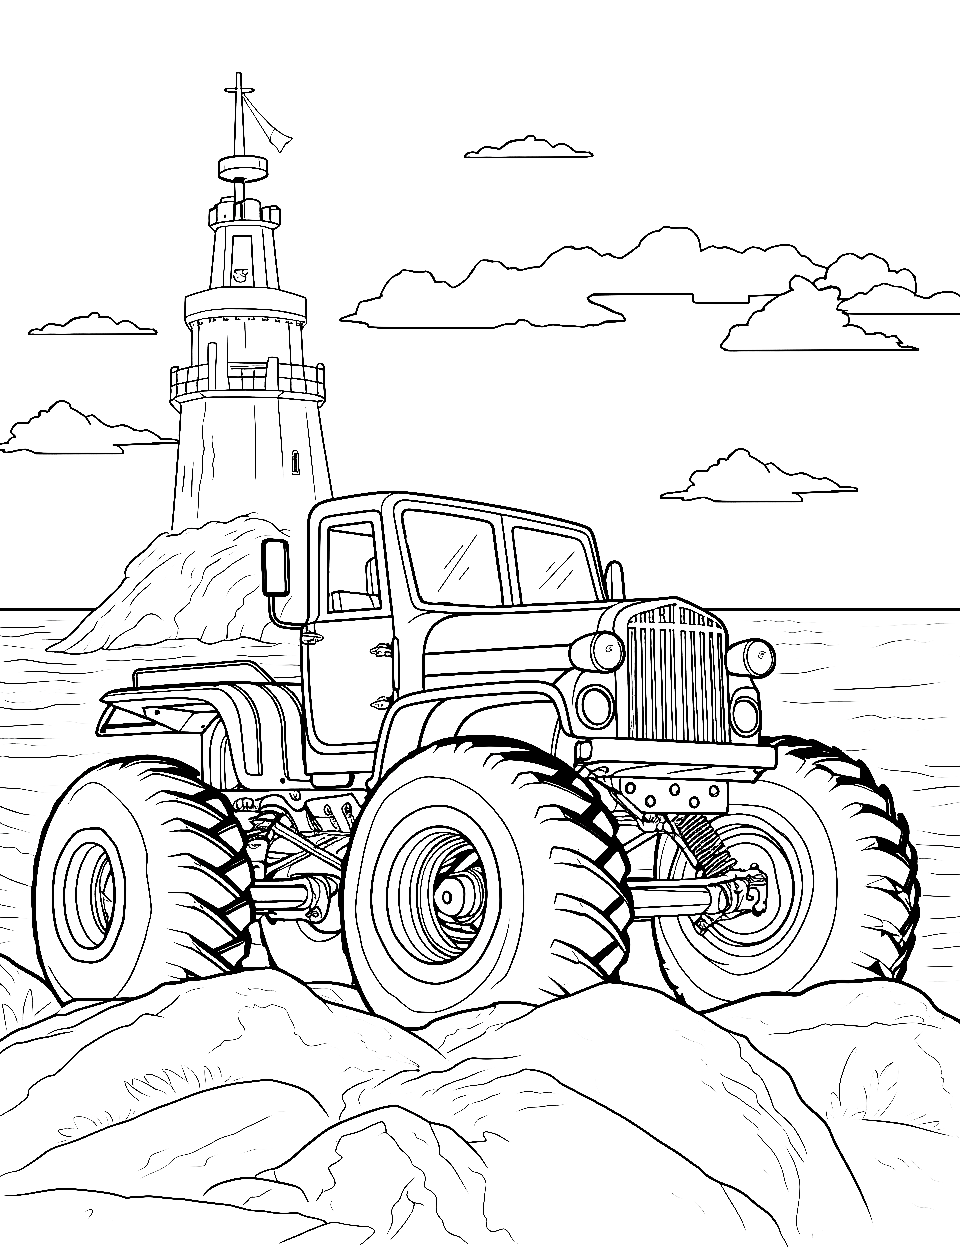 Lighthouse Coastal Cruise Monster Truck Coloring Page - An old school Monster truck navigating the rocky coast near a lighthouse.